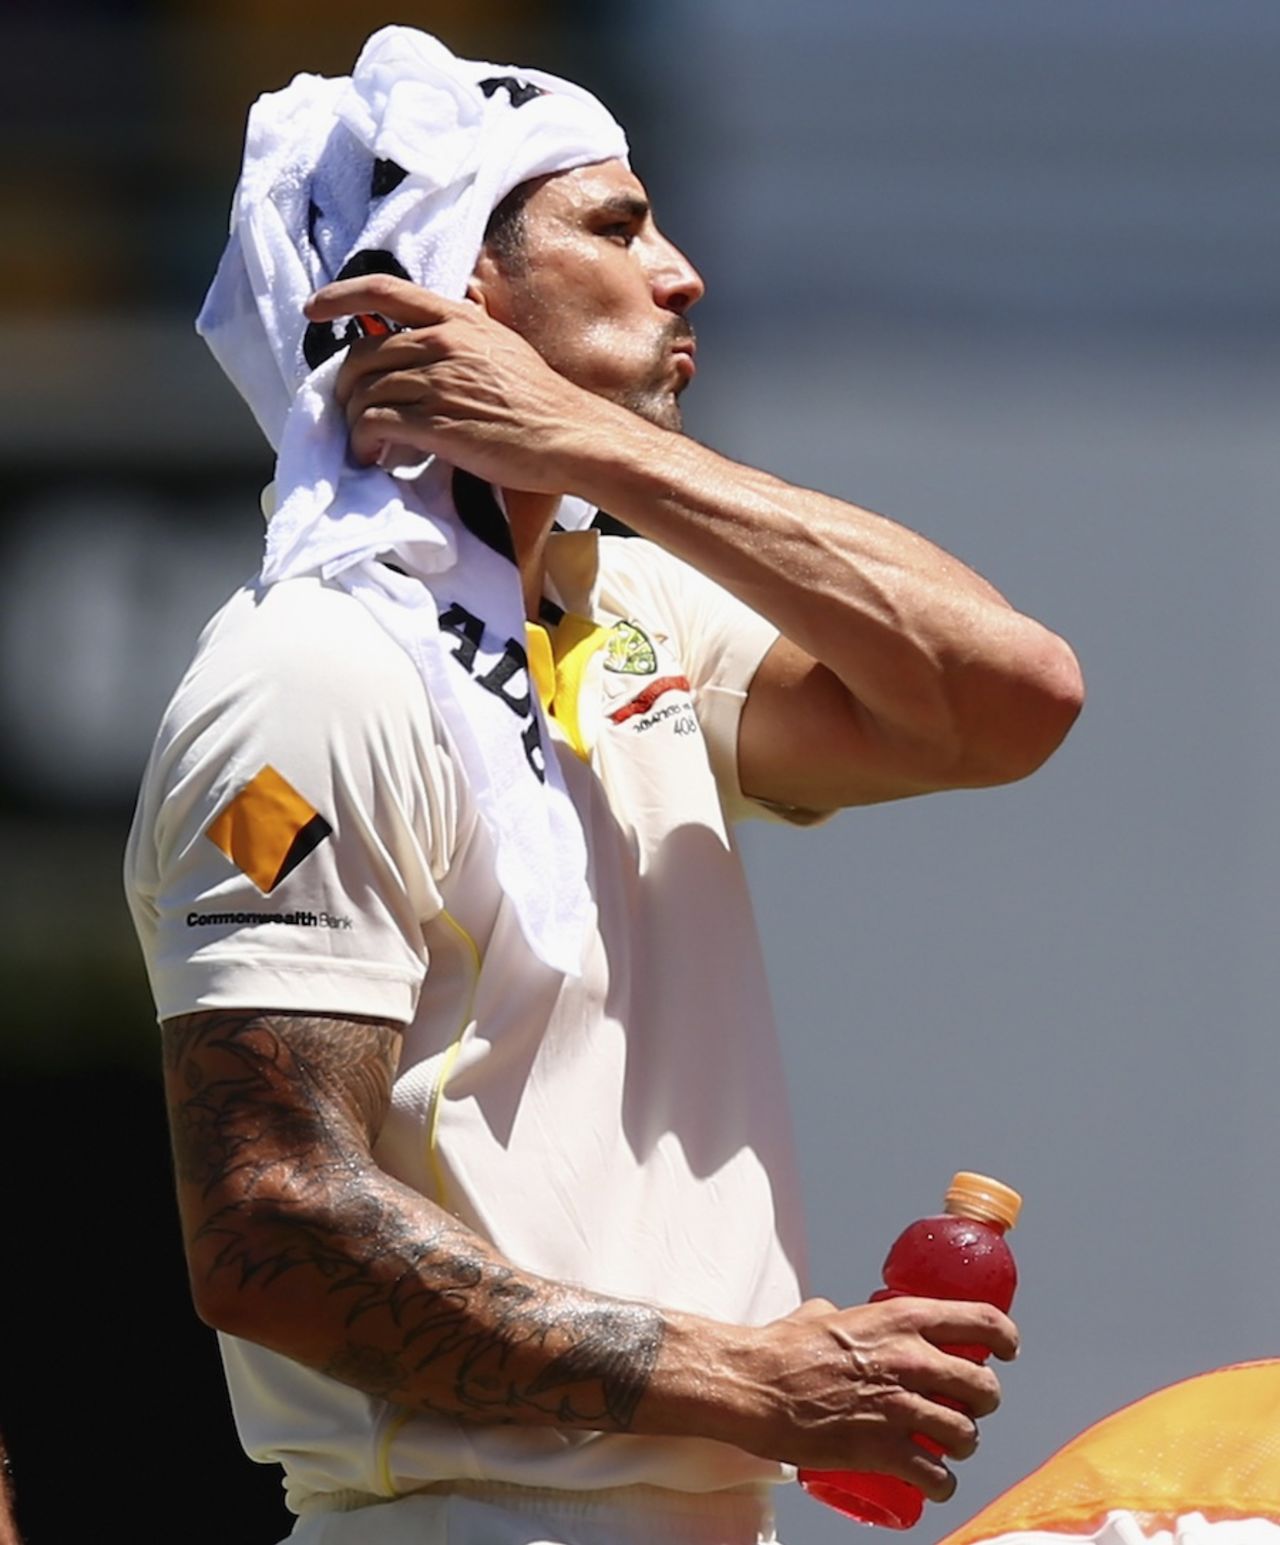 Mitchell Johnson tries to cool off, Australia v India, 2nd Test, Brisbane, 3rd day, December 19, 2014